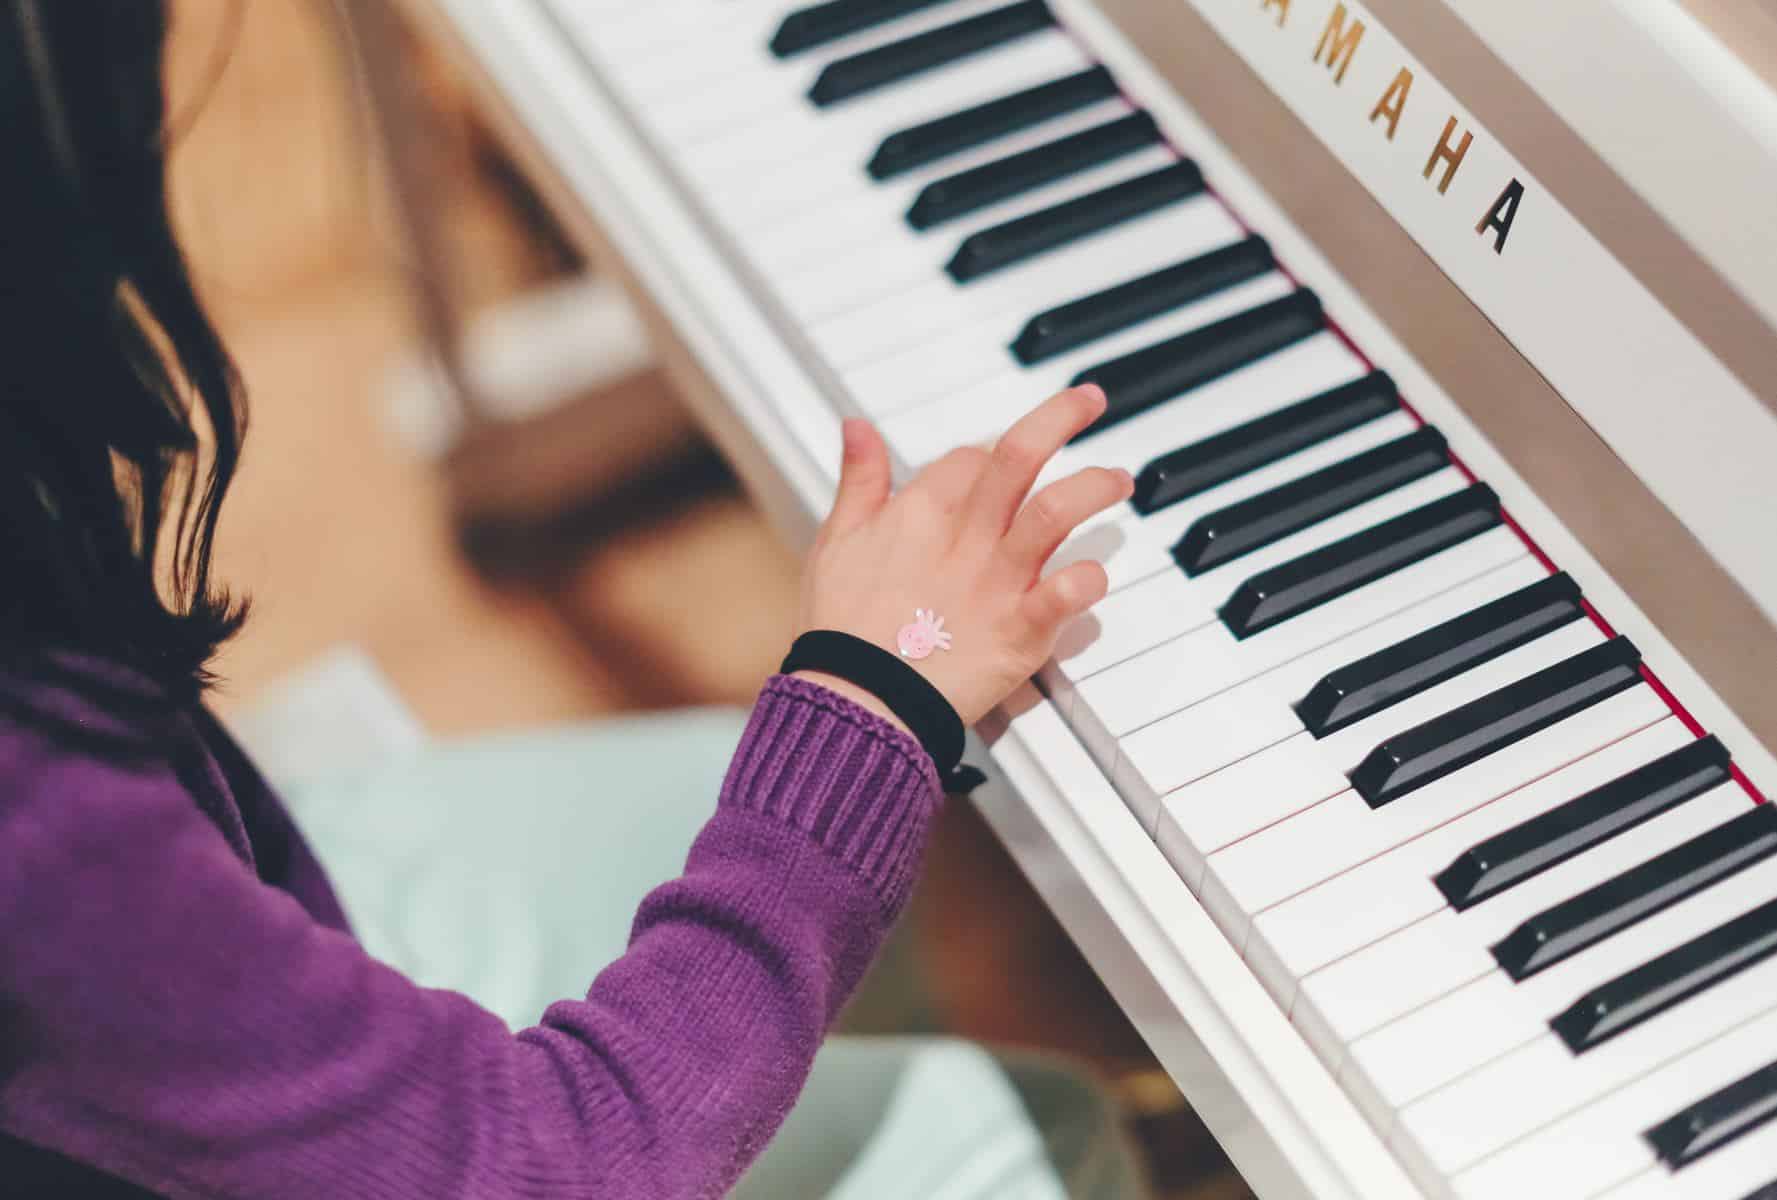 Why You Should Consider Online Music Lessons